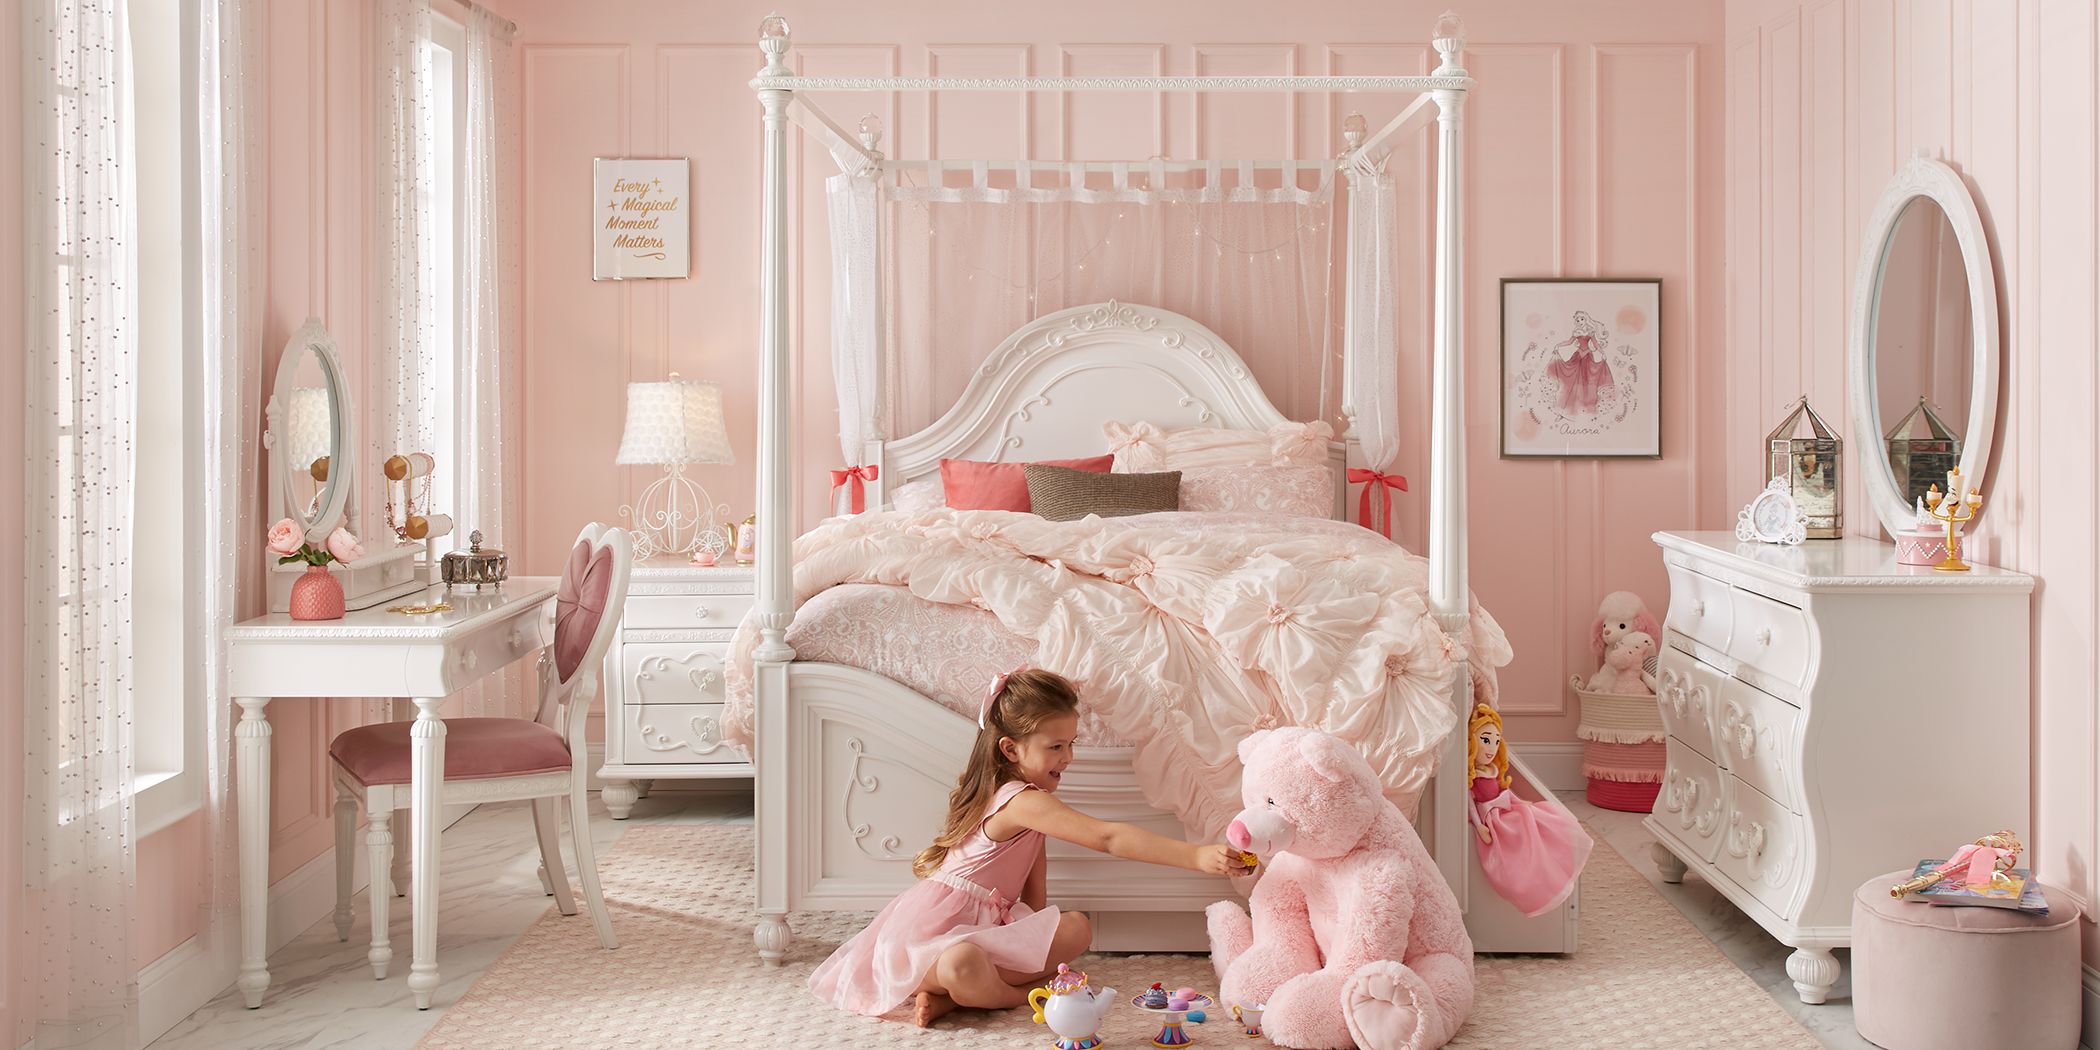 twin size princess bed